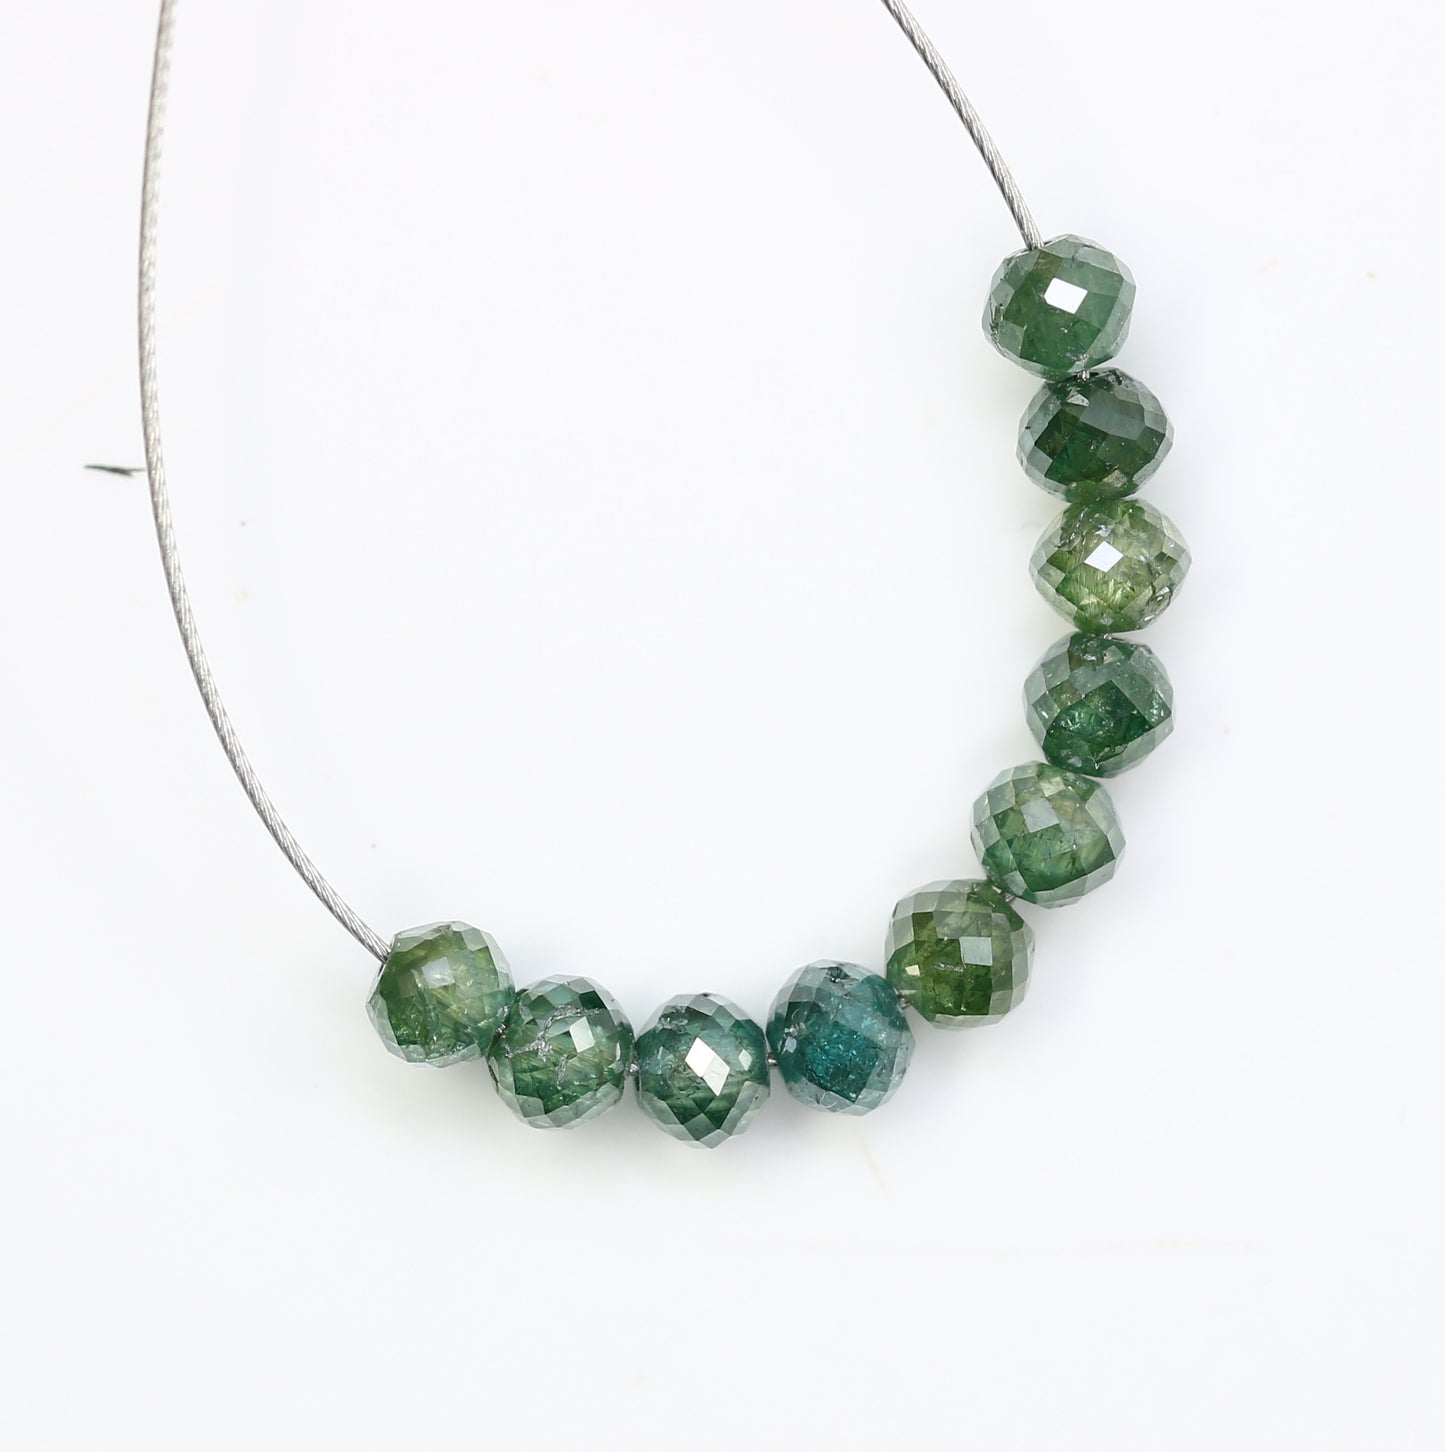 1.87 Carat Fancy Green Color Loose Round Polished Drilled Beads For Diamond Necklace